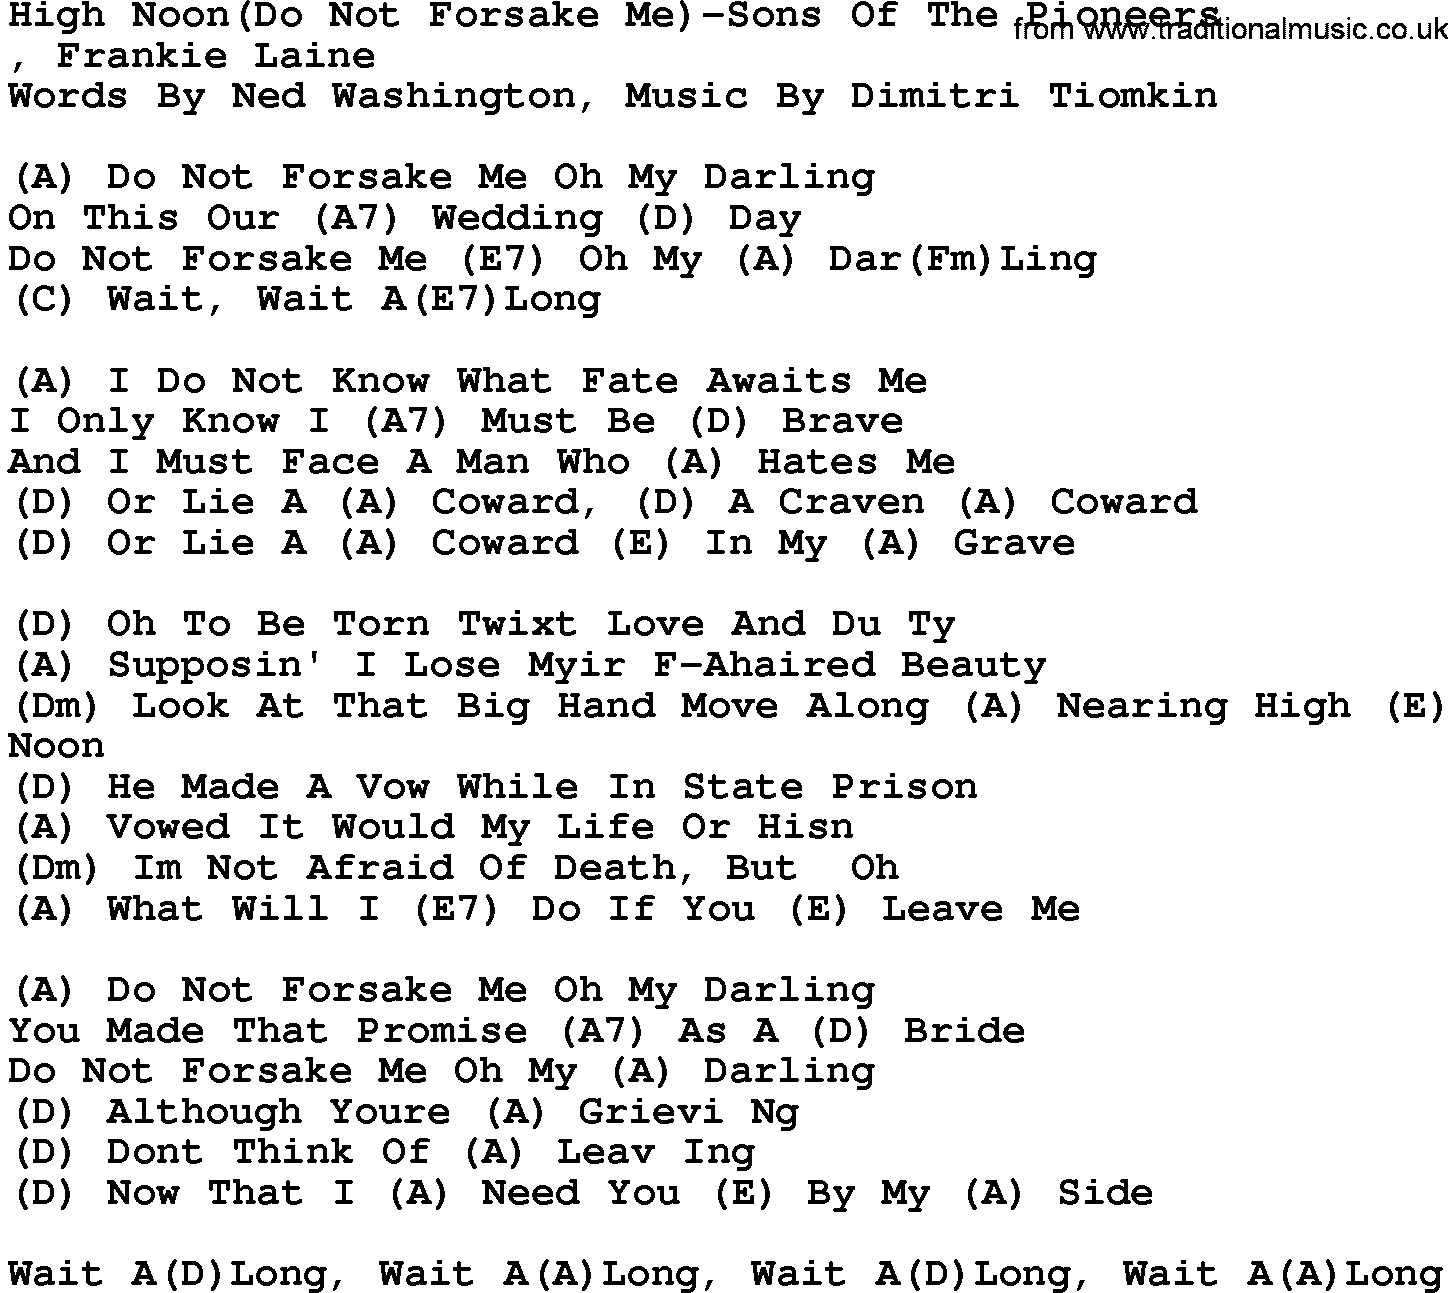 Country music song: High Noon(Do Not Forsake Me)-Sons Of The Pioneers lyrics and chords